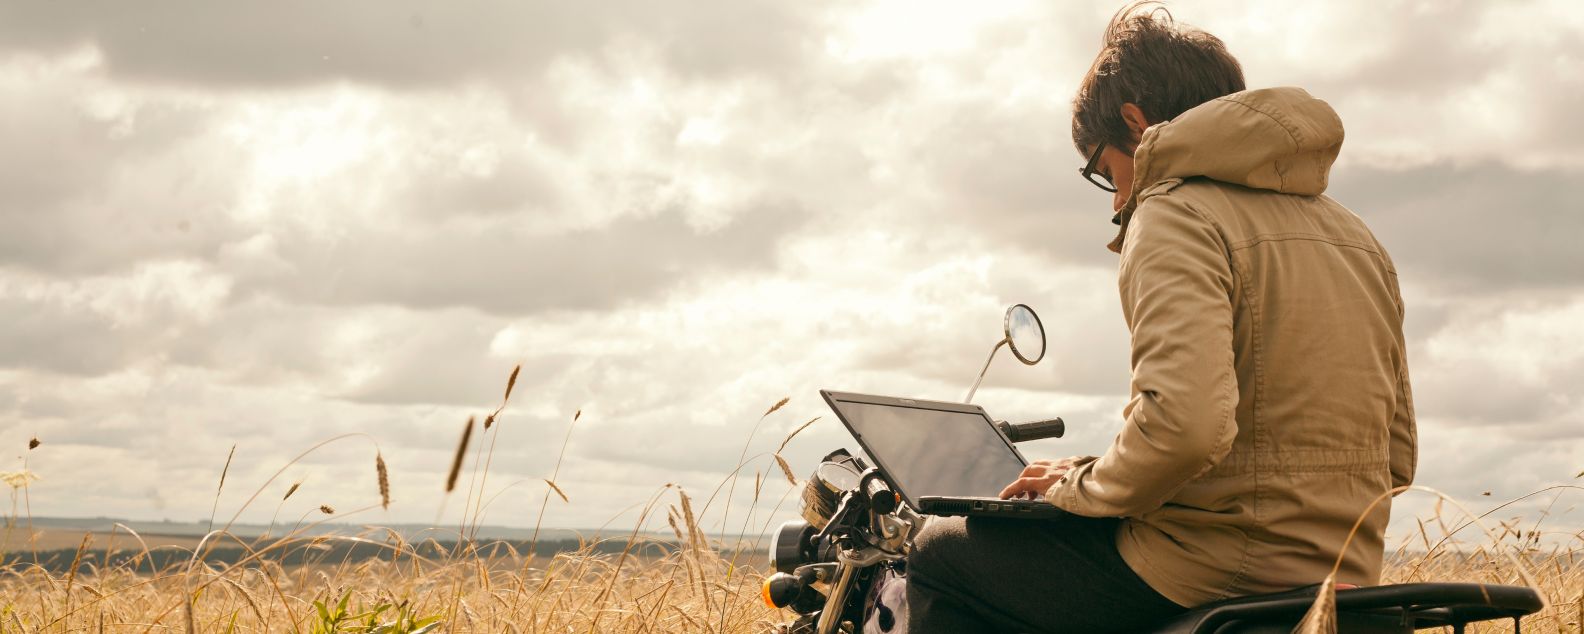 Person sitting on motorcycle while working on a laptop computer